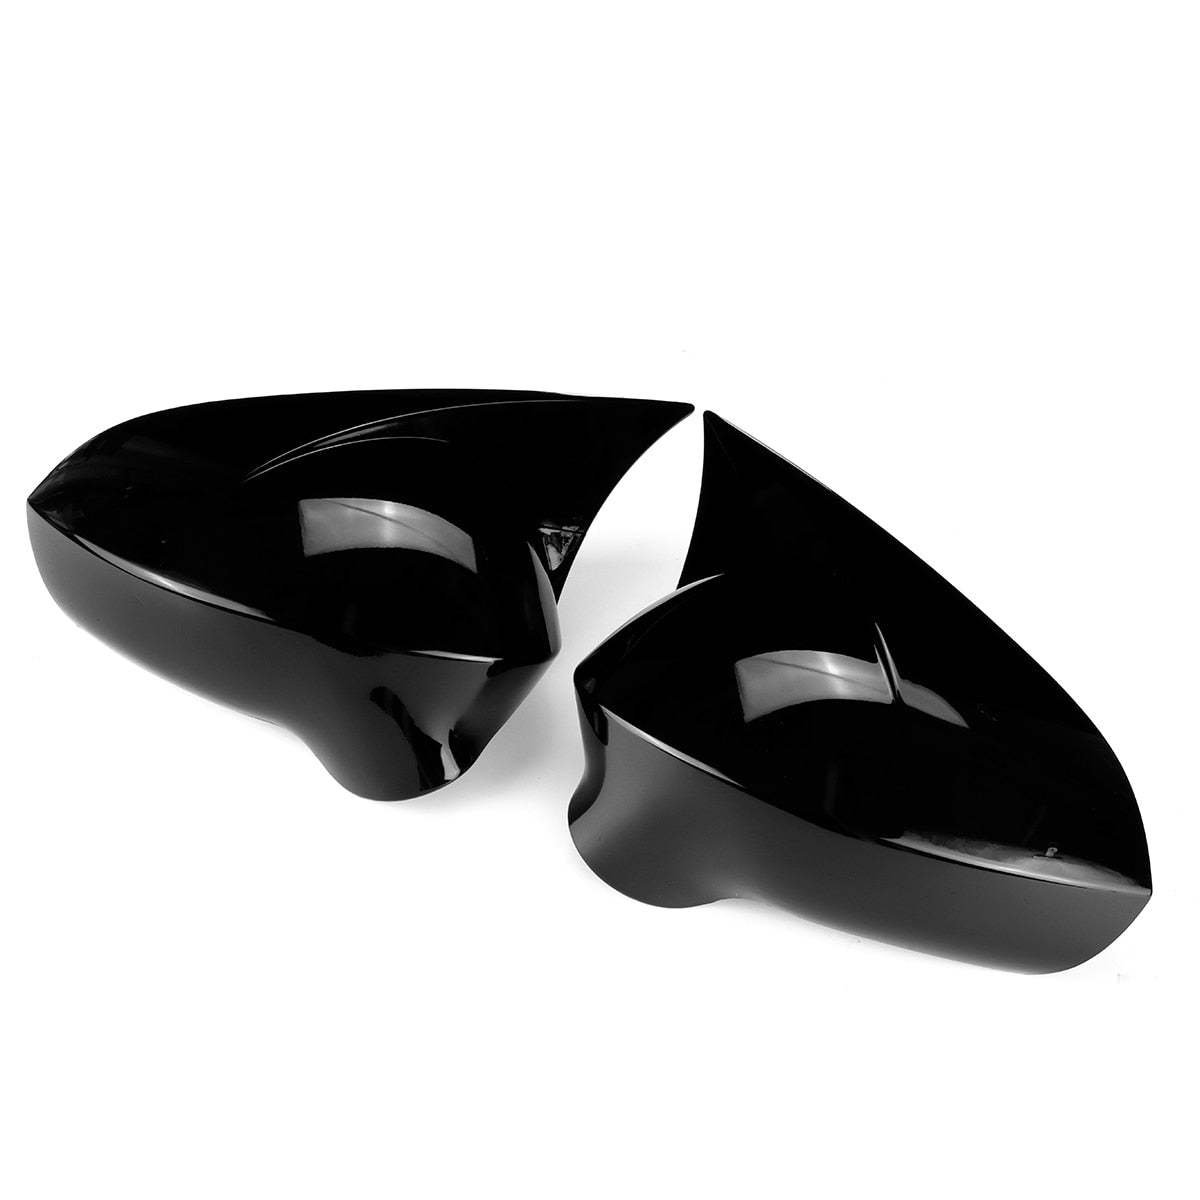 for Renault Megane 4 MK4 2 Pieces ABS Plastic Bat Wing Mirror Covers Caps  Rearview Mirror Case Cover Gloss Black Car Accessories